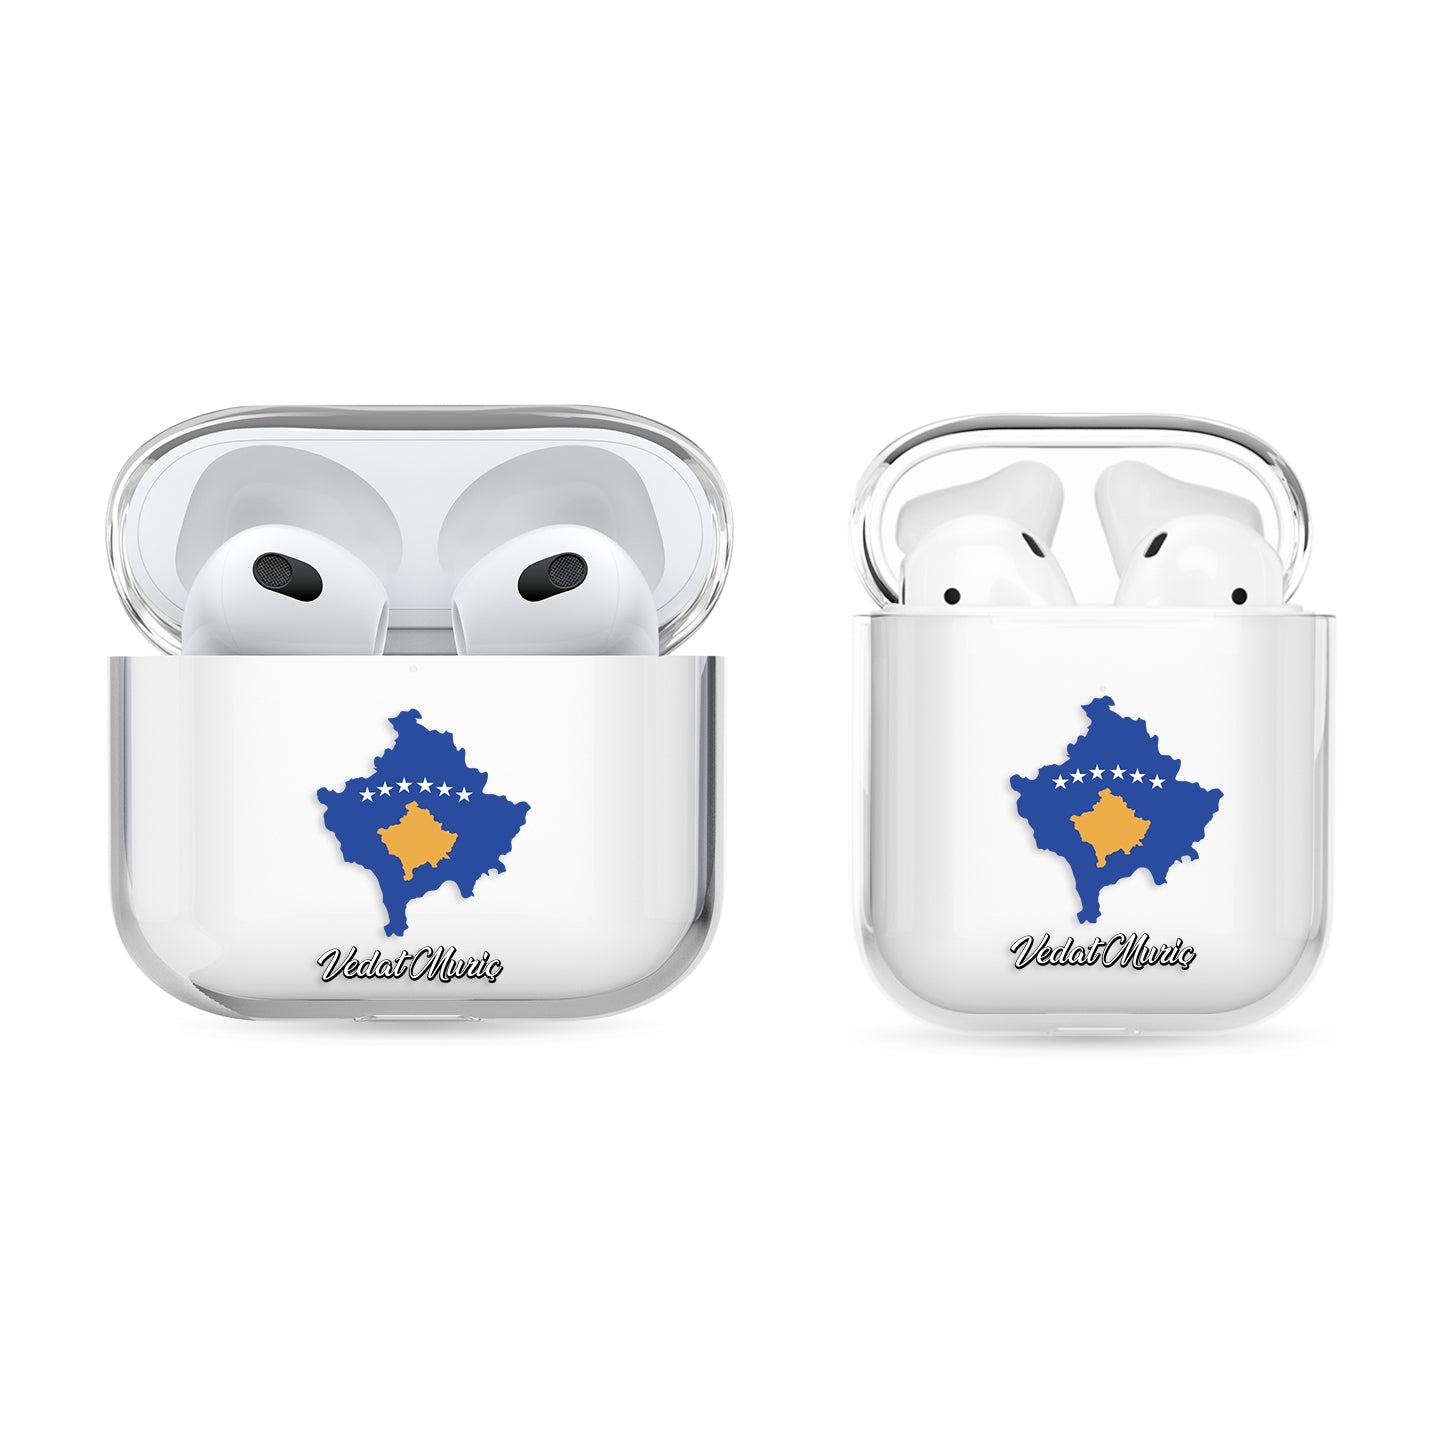 Airpods Hülle - Kosovo Flagge - 1instaphone